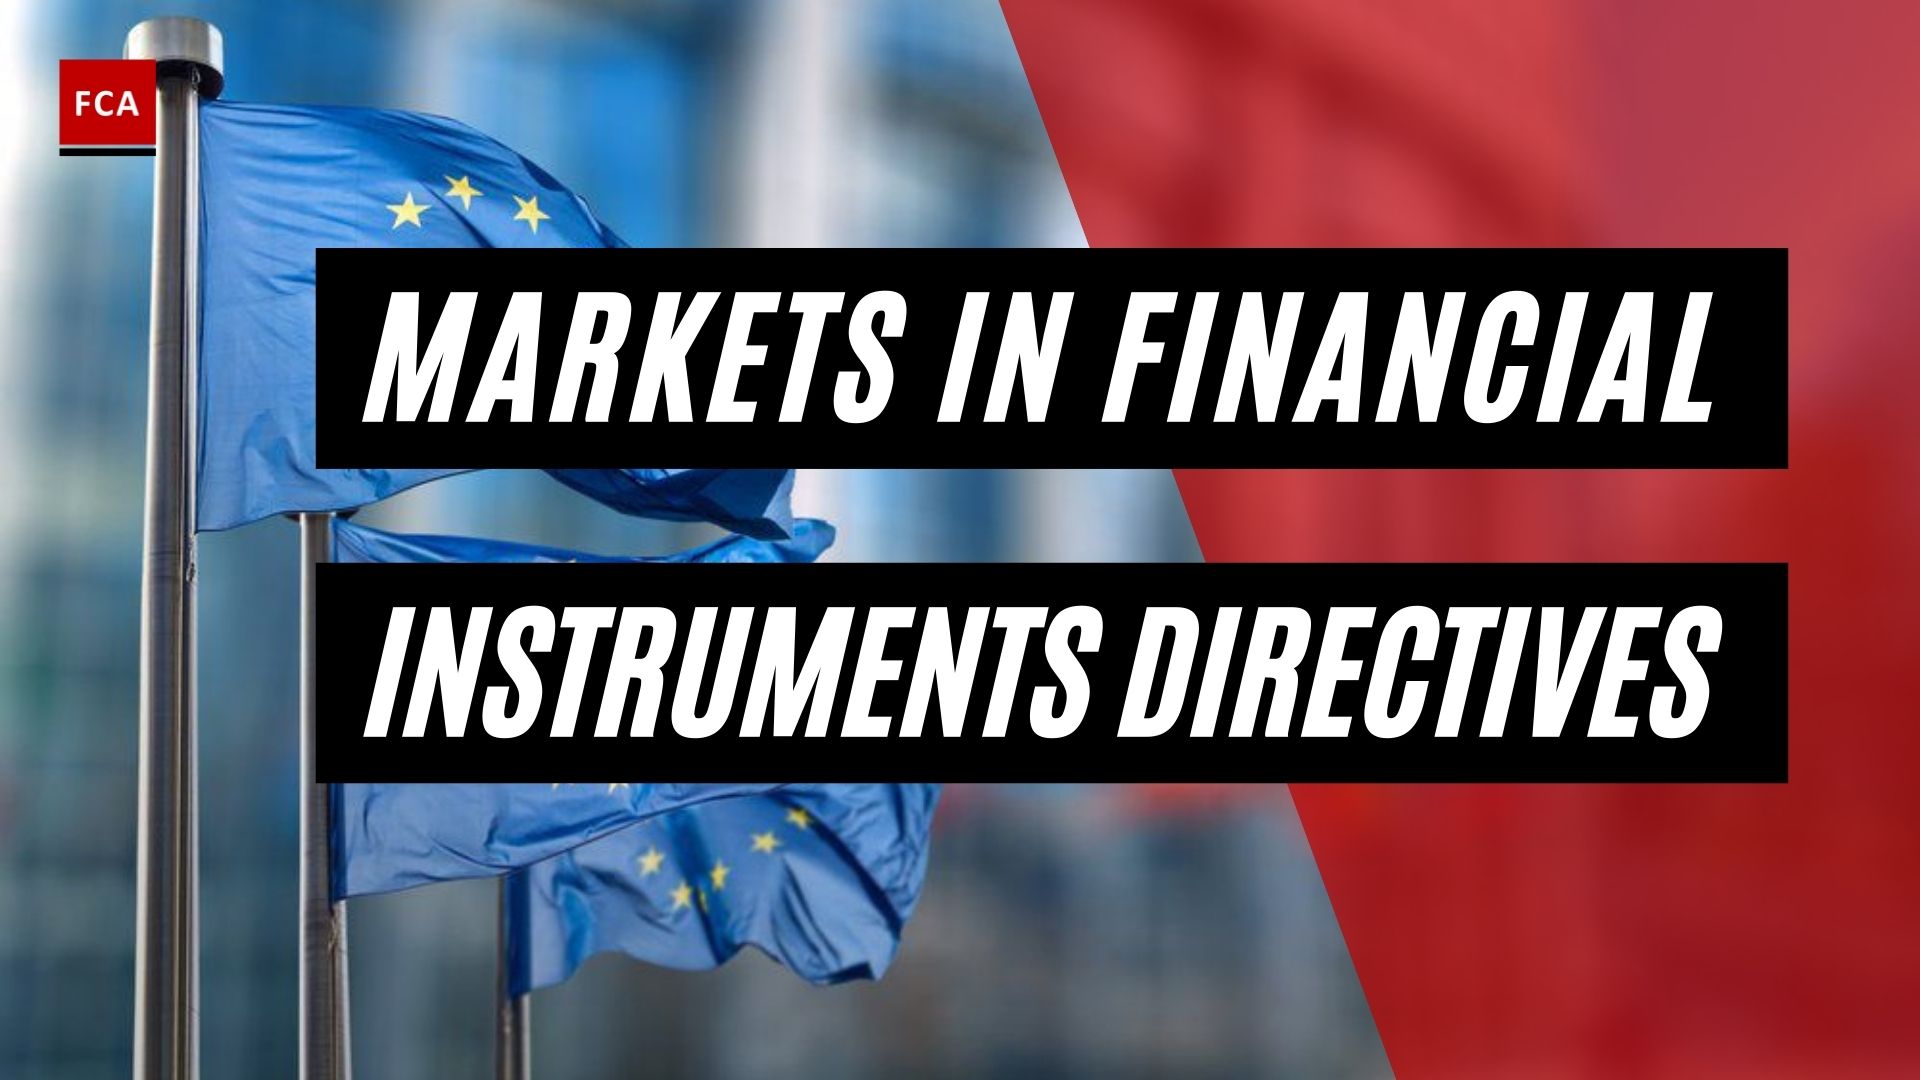 Markets In Financial Instruments Directives